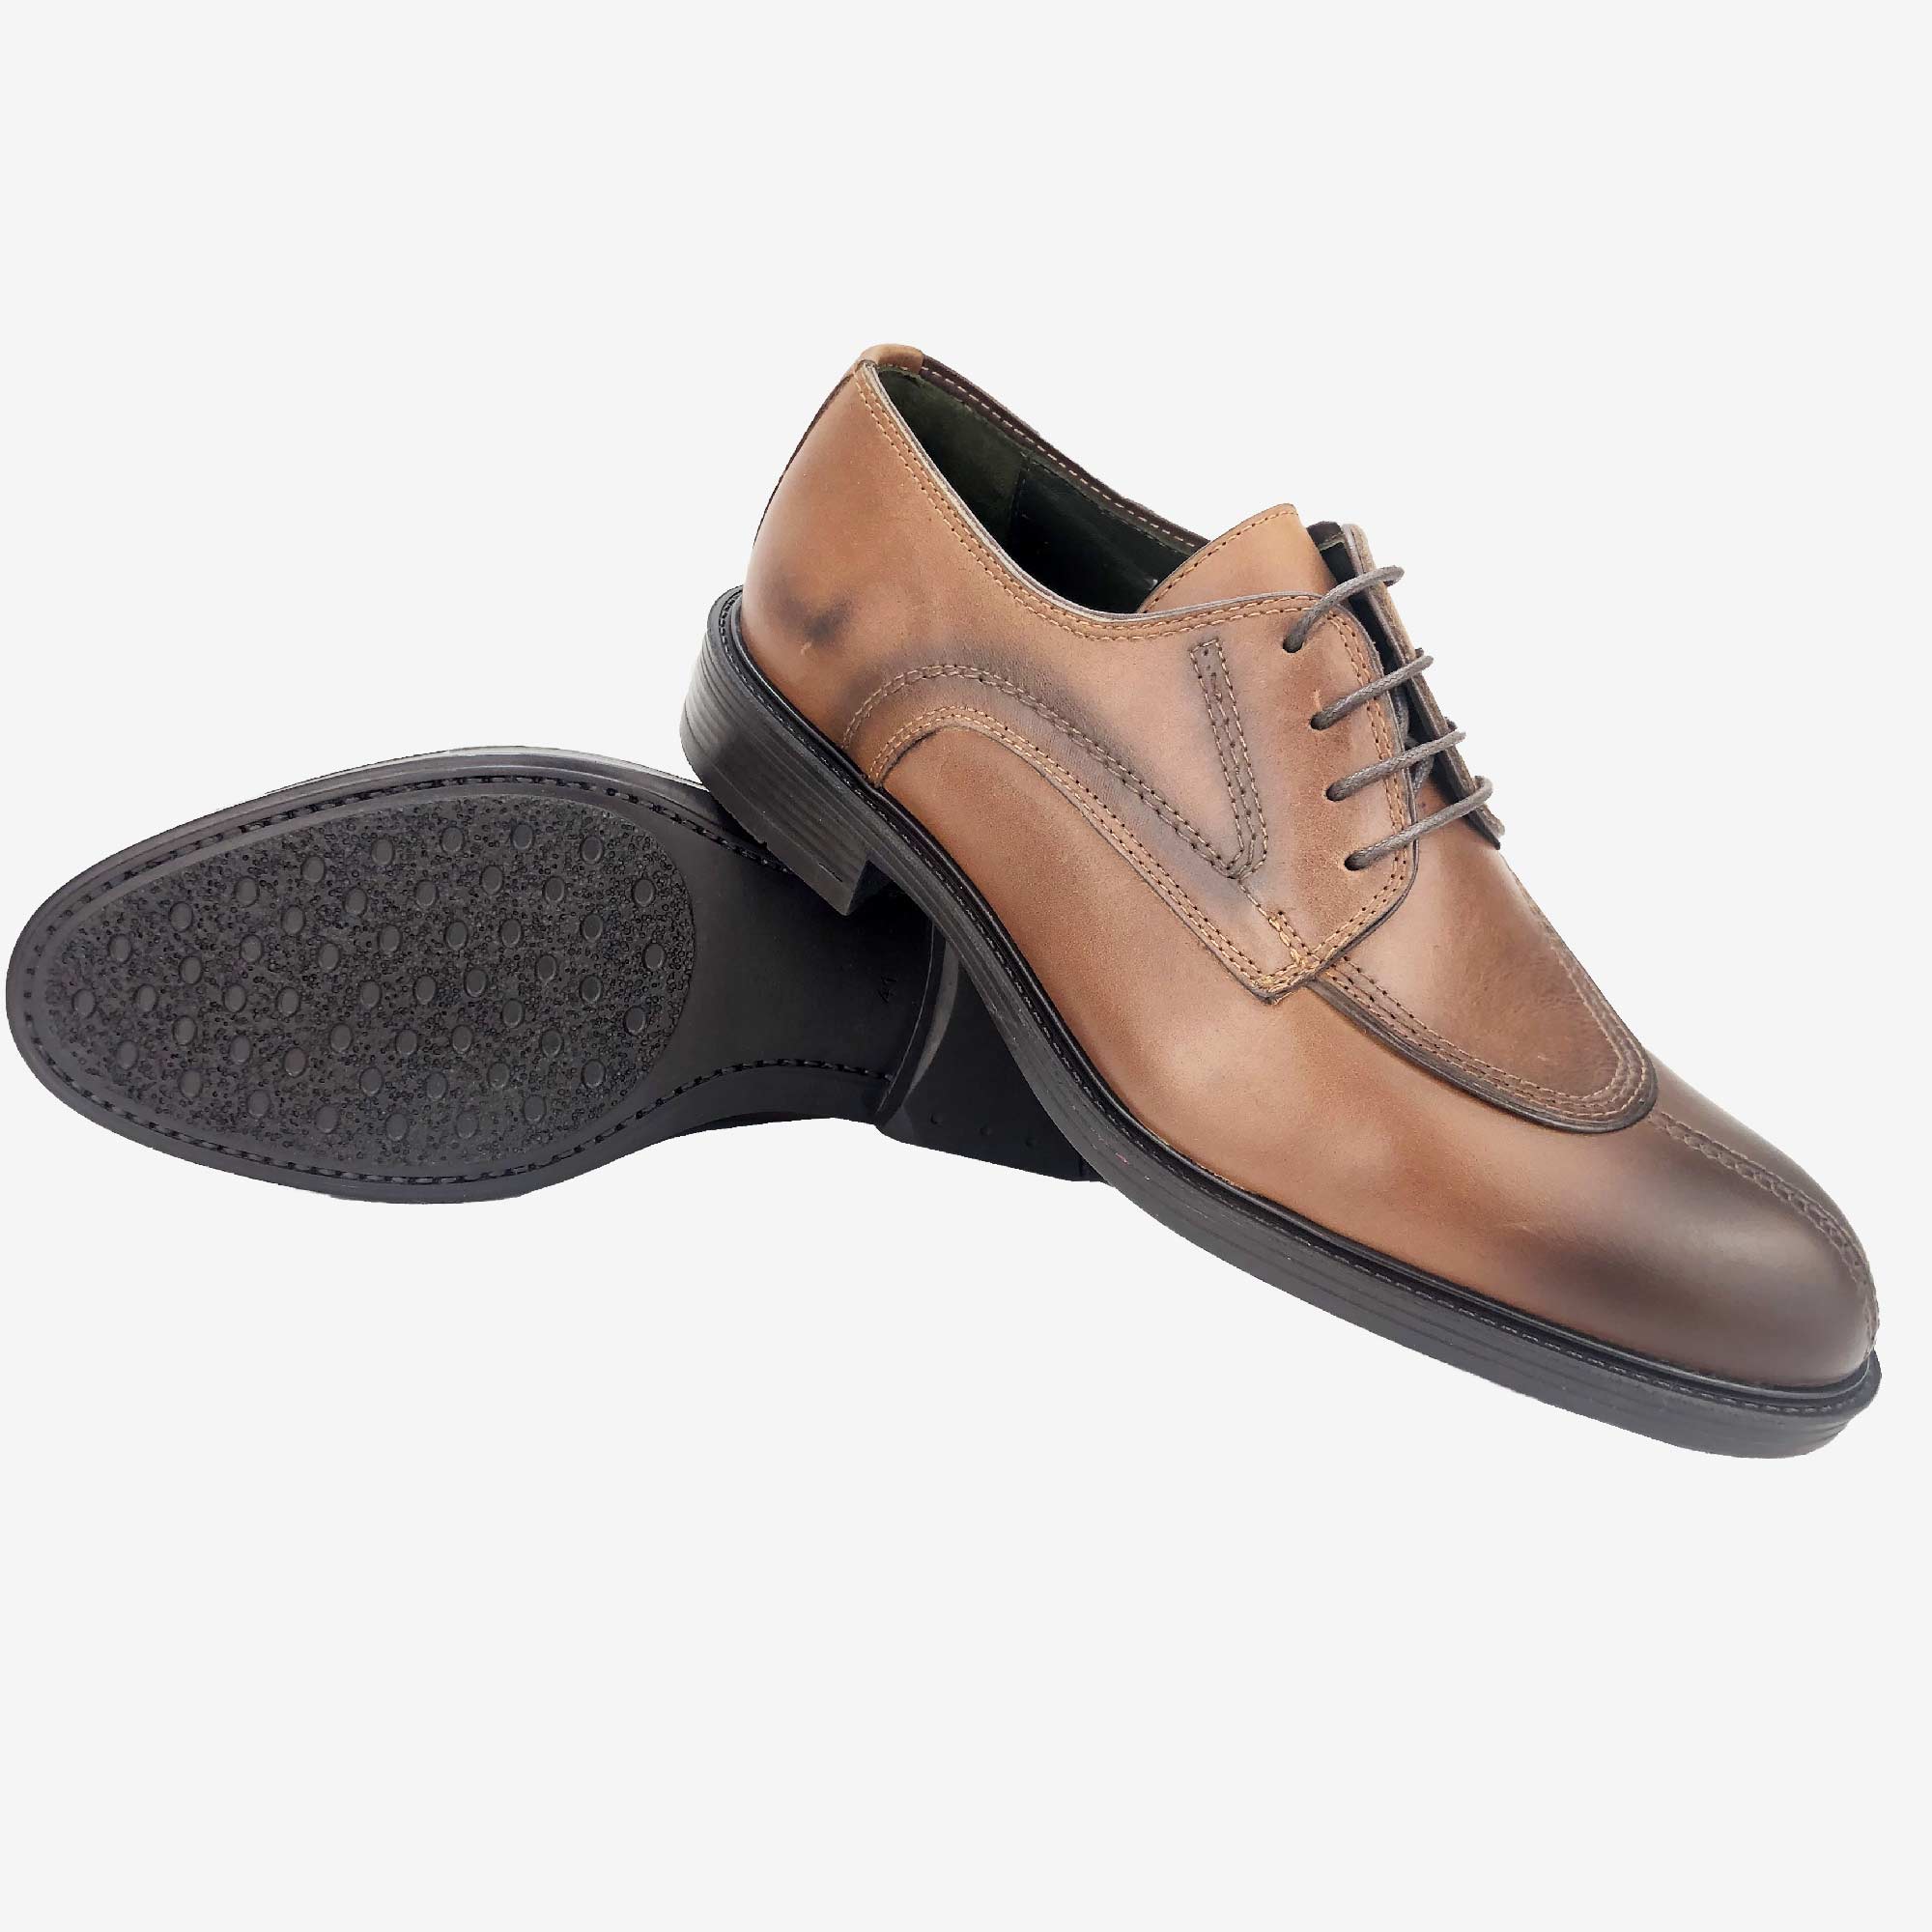 CH1301-015 - Chaussure cuir Taba - deluxe-maroc